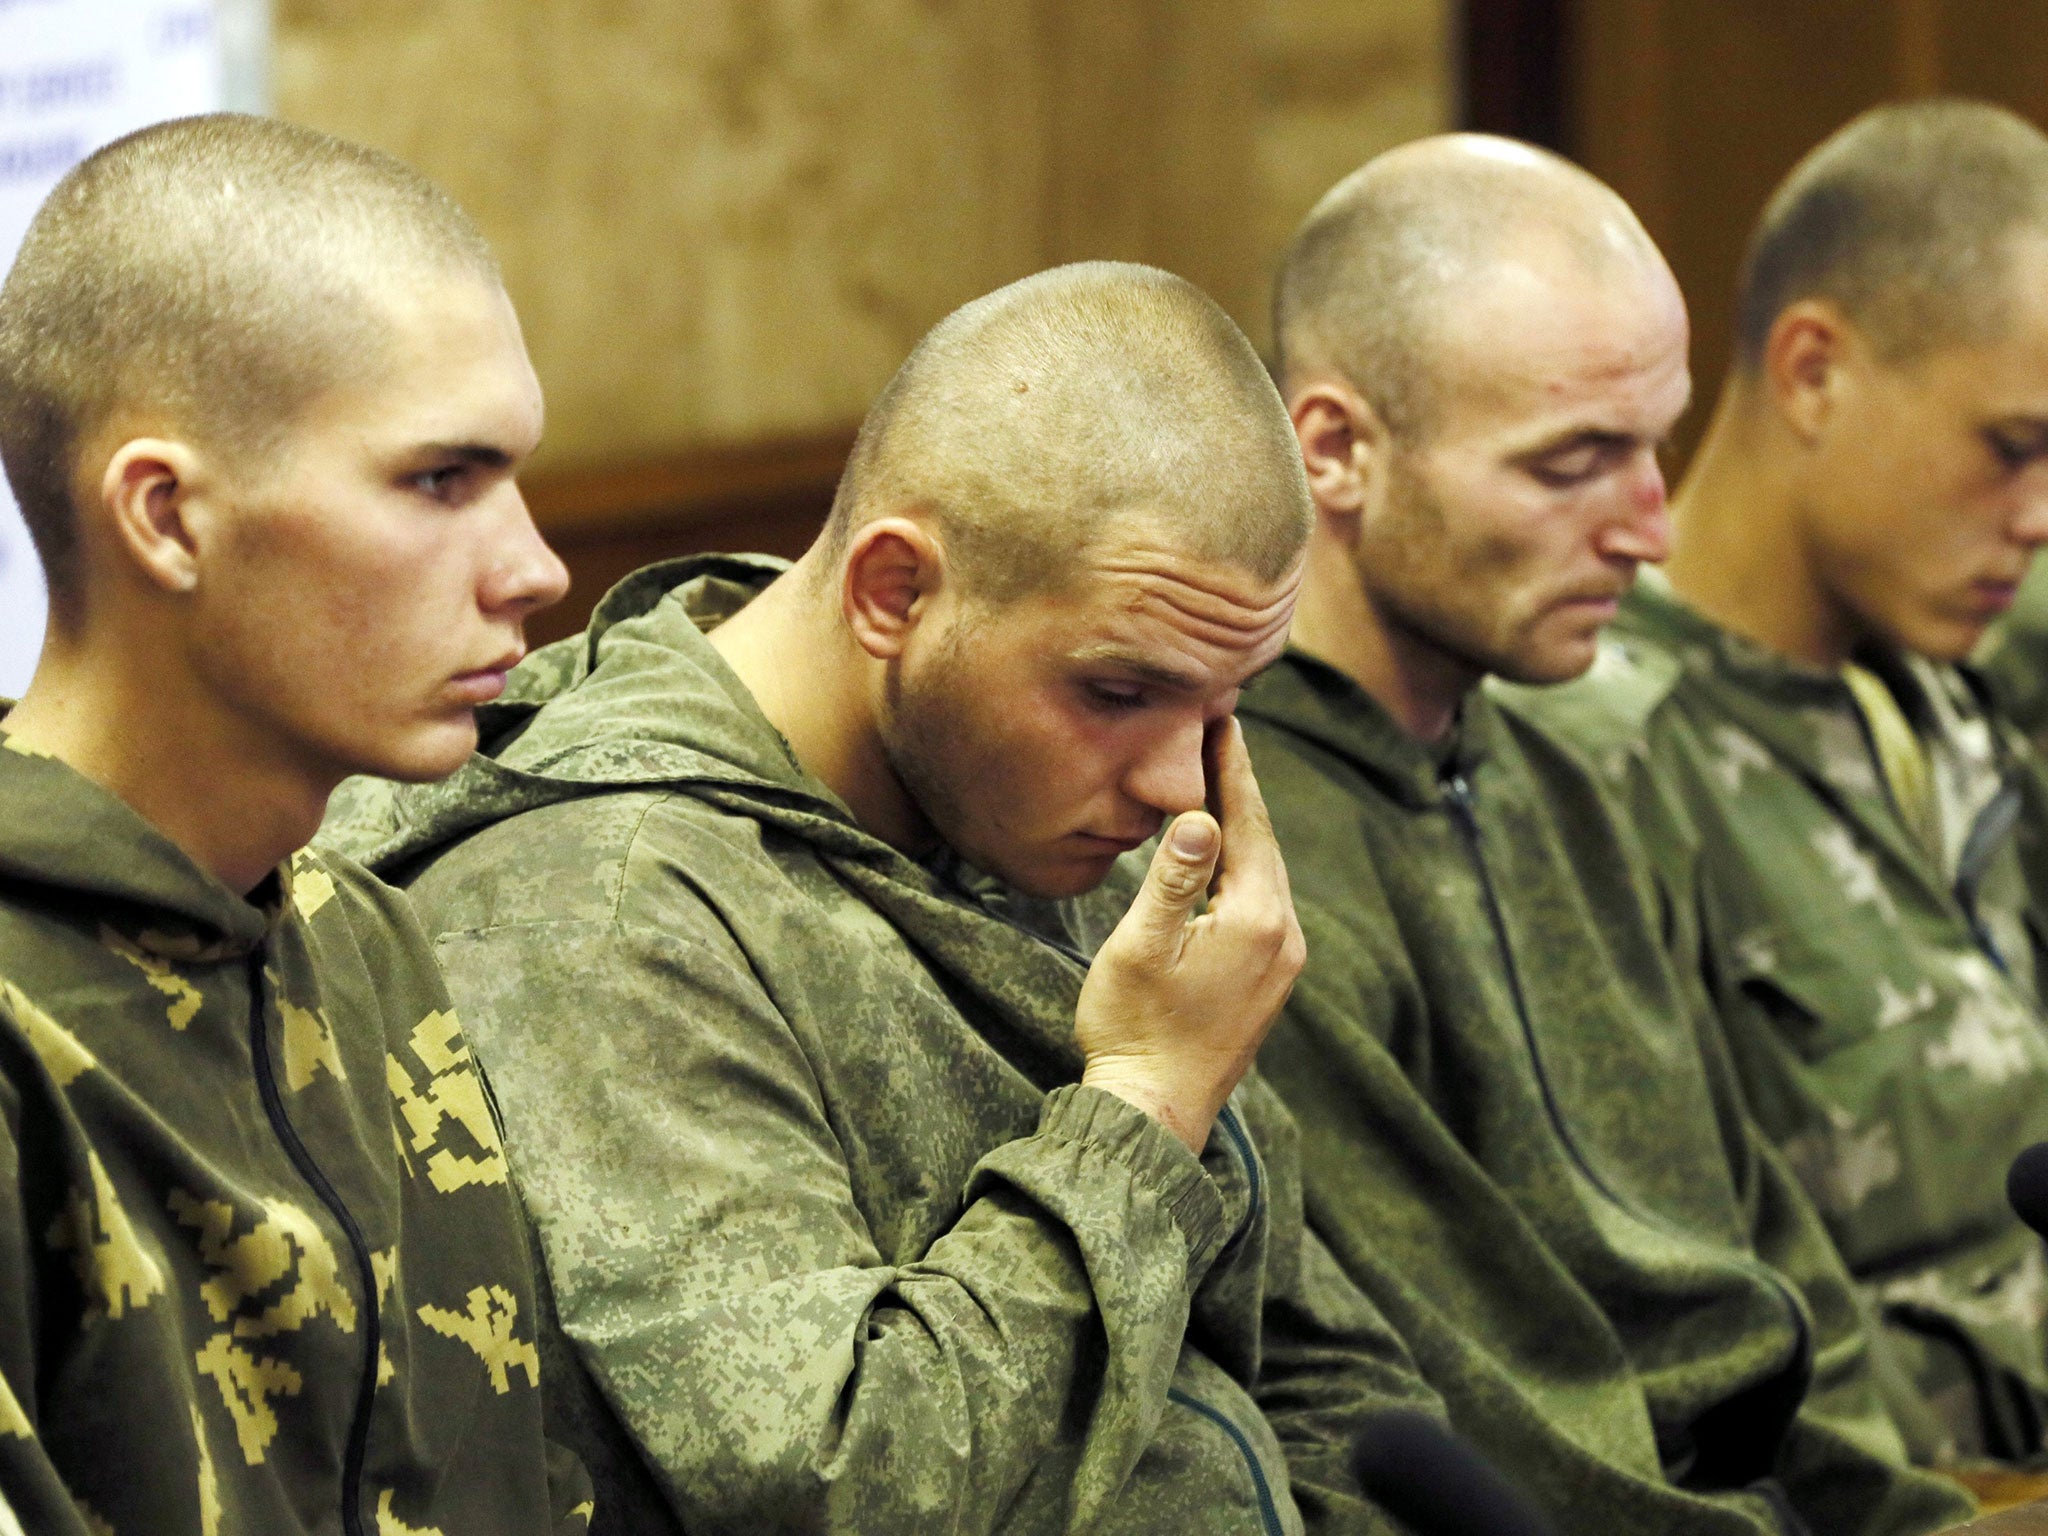 Russian paratroopers captured by Ukrainian forces are put on show at a press
conference in Kiev